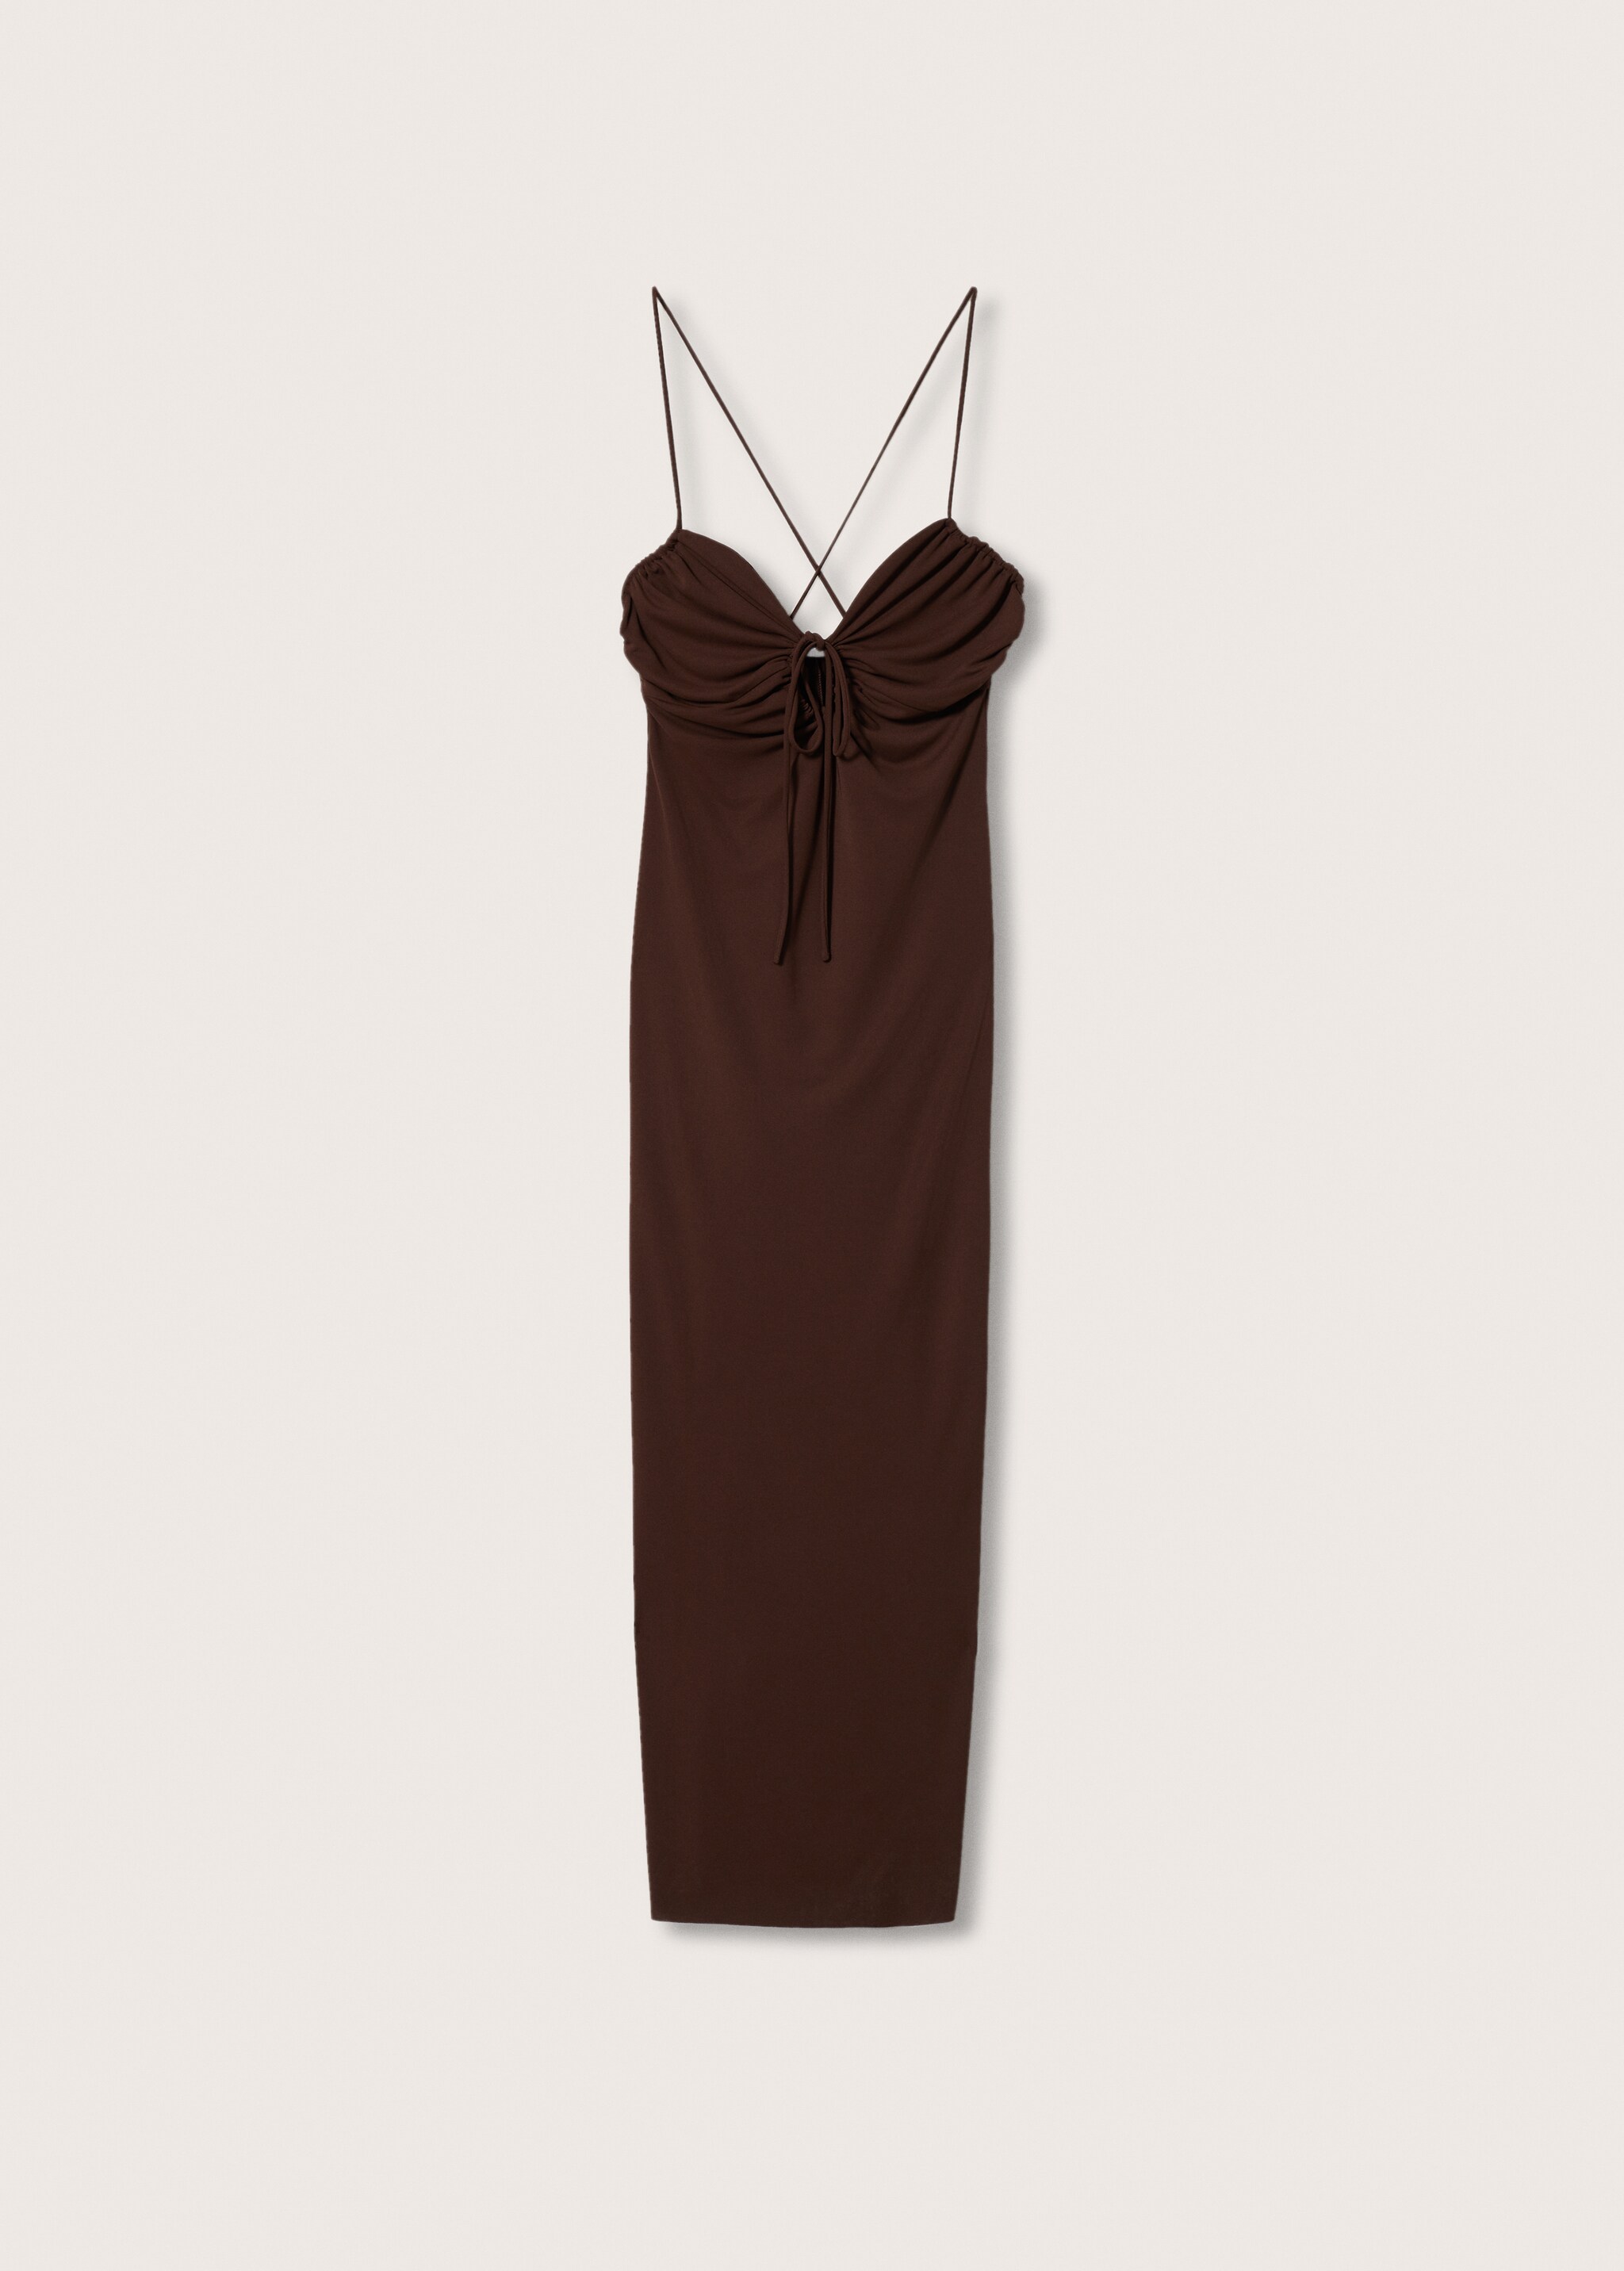 Ruched detail dress - Article without model